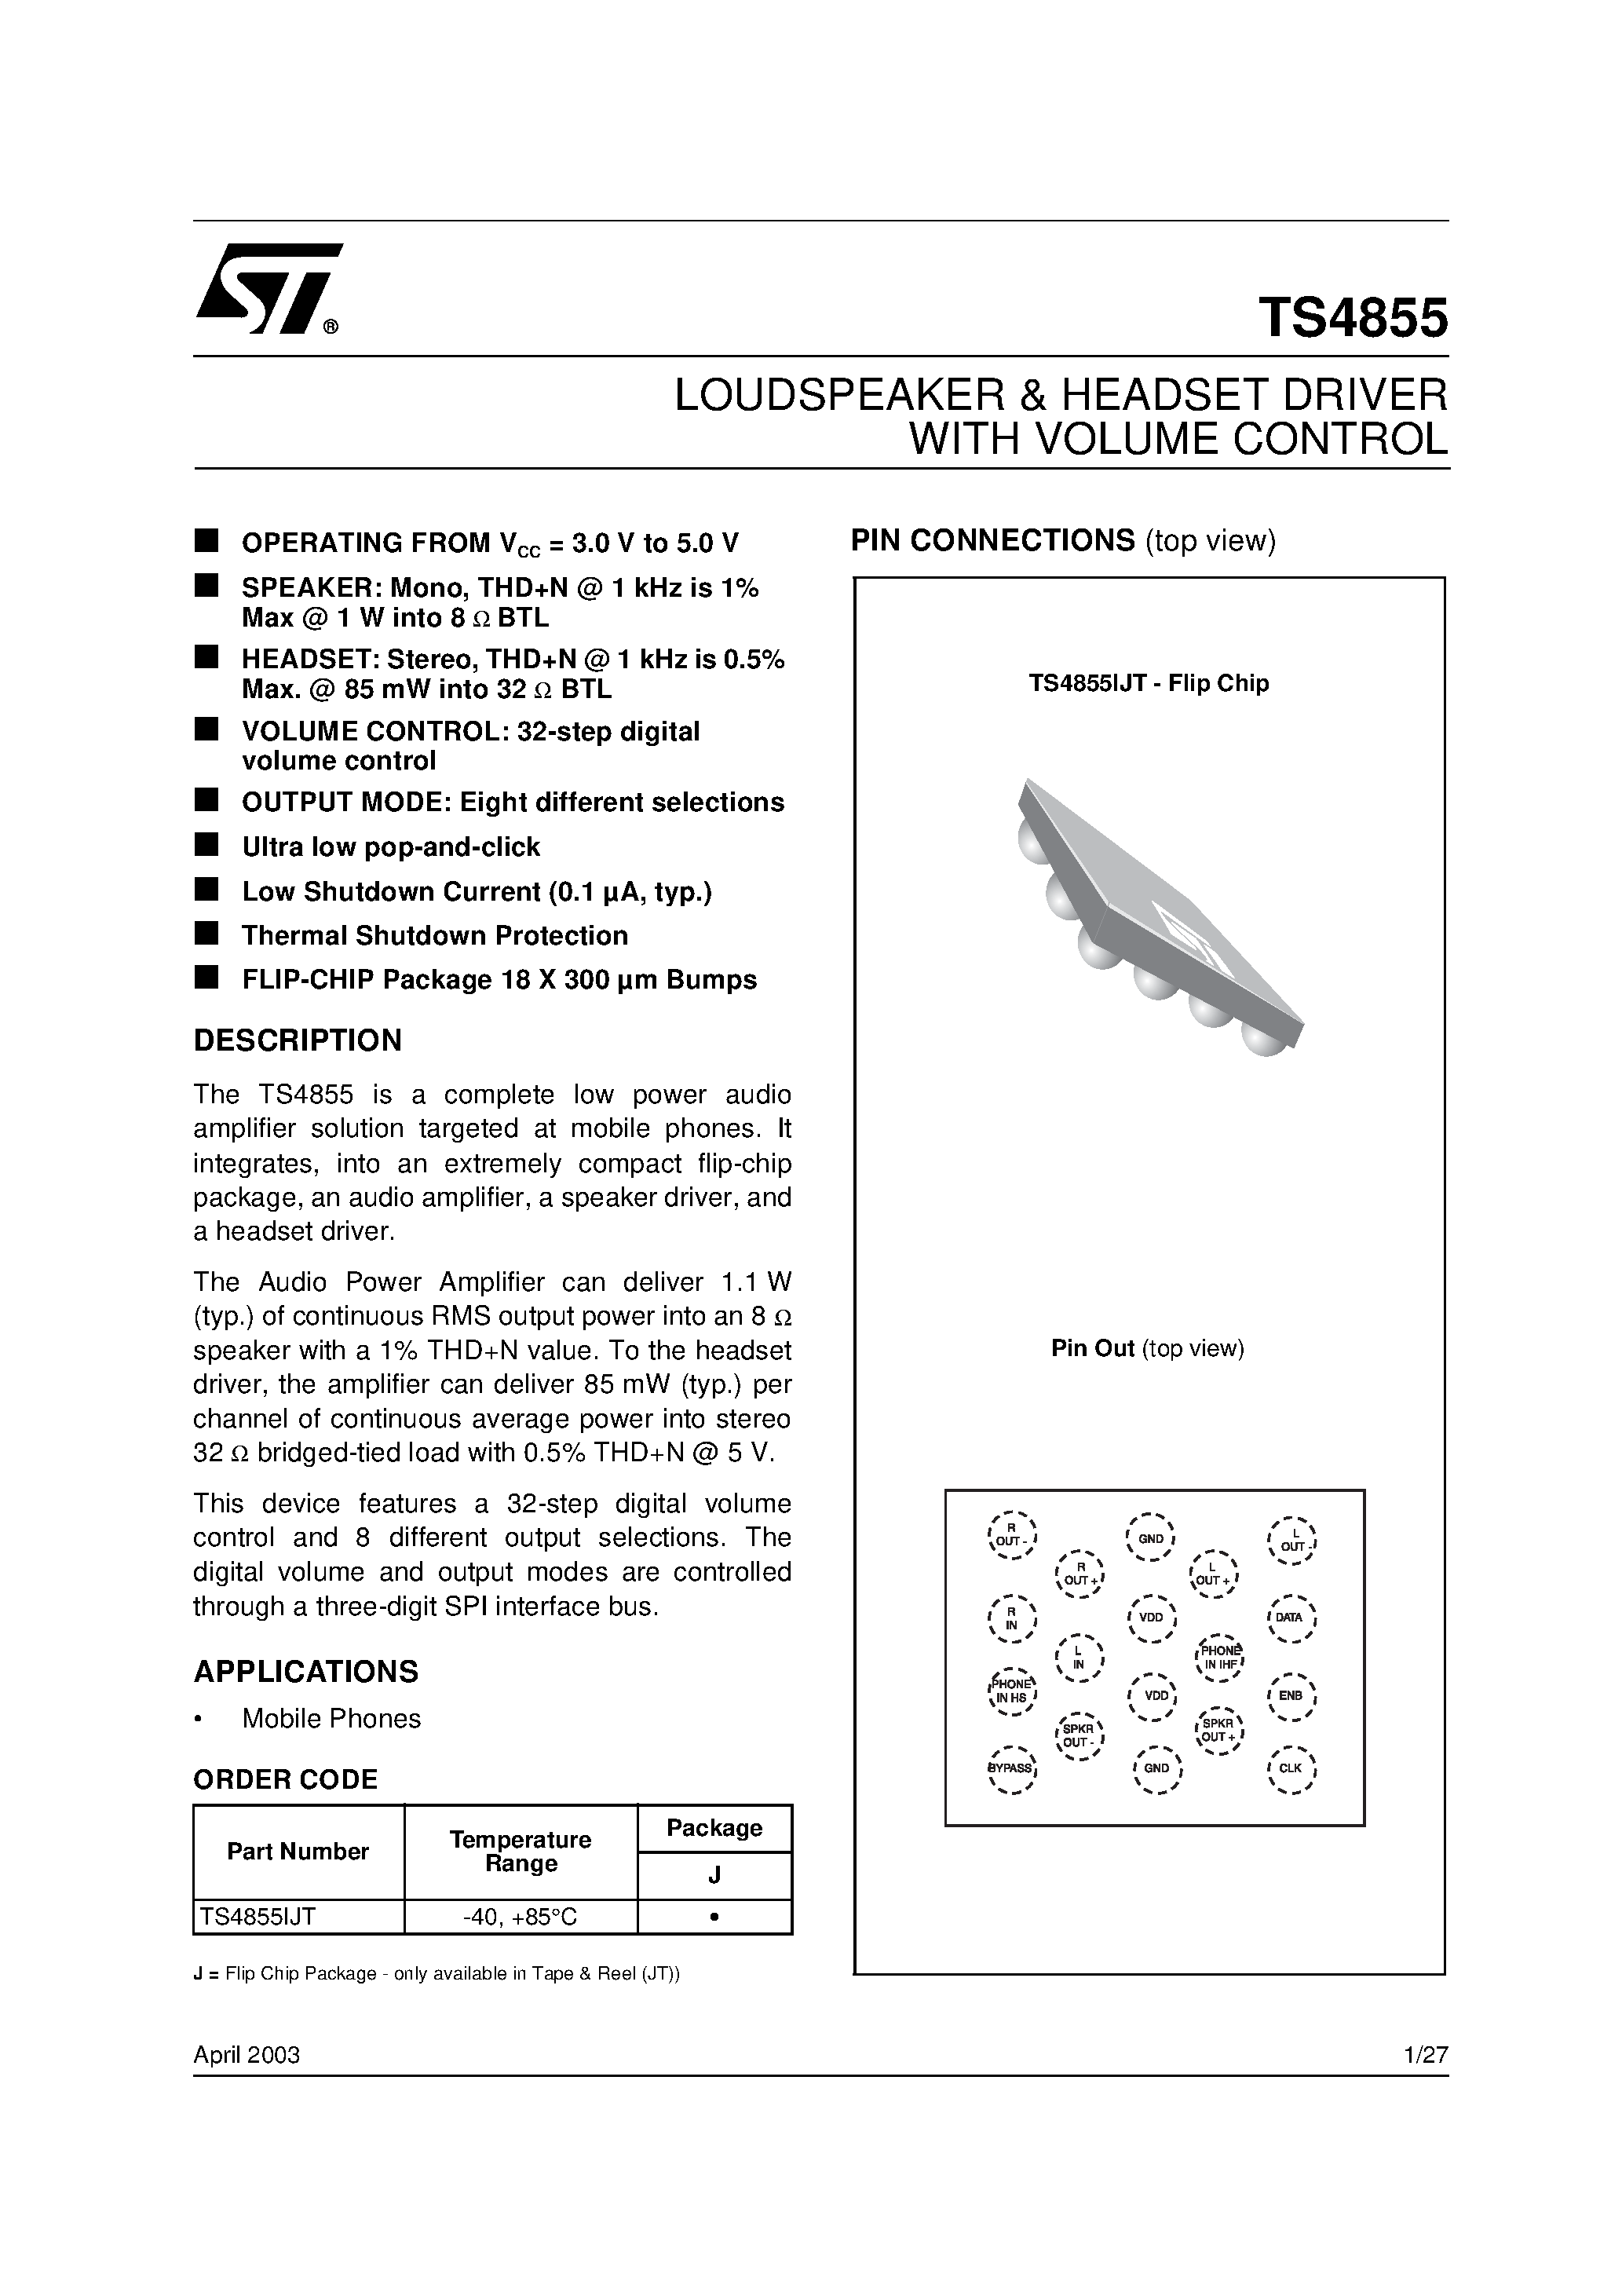 Datasheet TS4855 - LOUDSPEAKER & HEADSET DRIVER WITH VOLUME CONTROL page 1